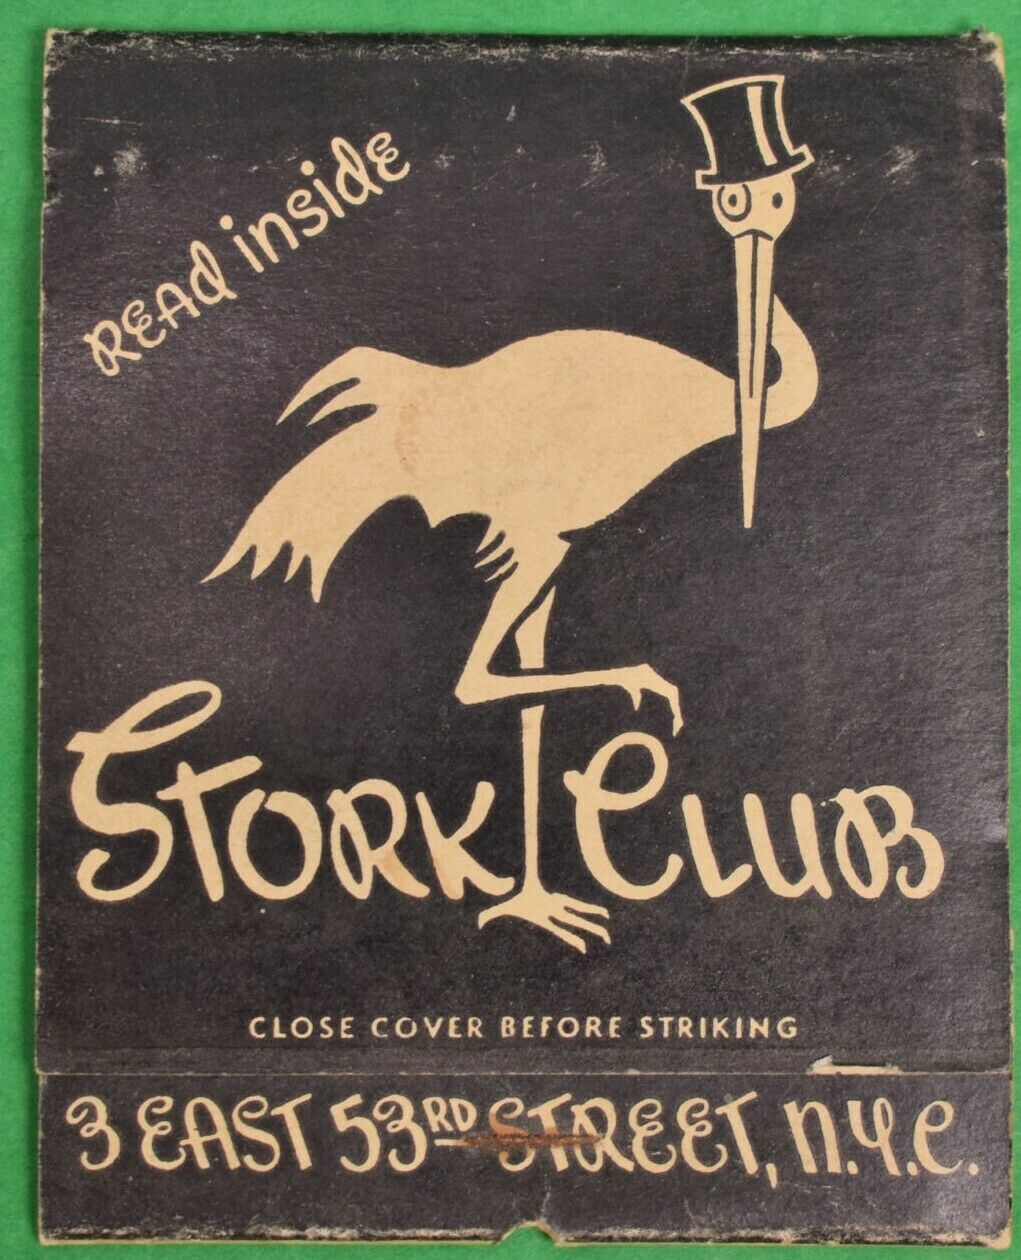 Oversize Stork Club 3 East 53rd St Nyc C1940s Matchbook